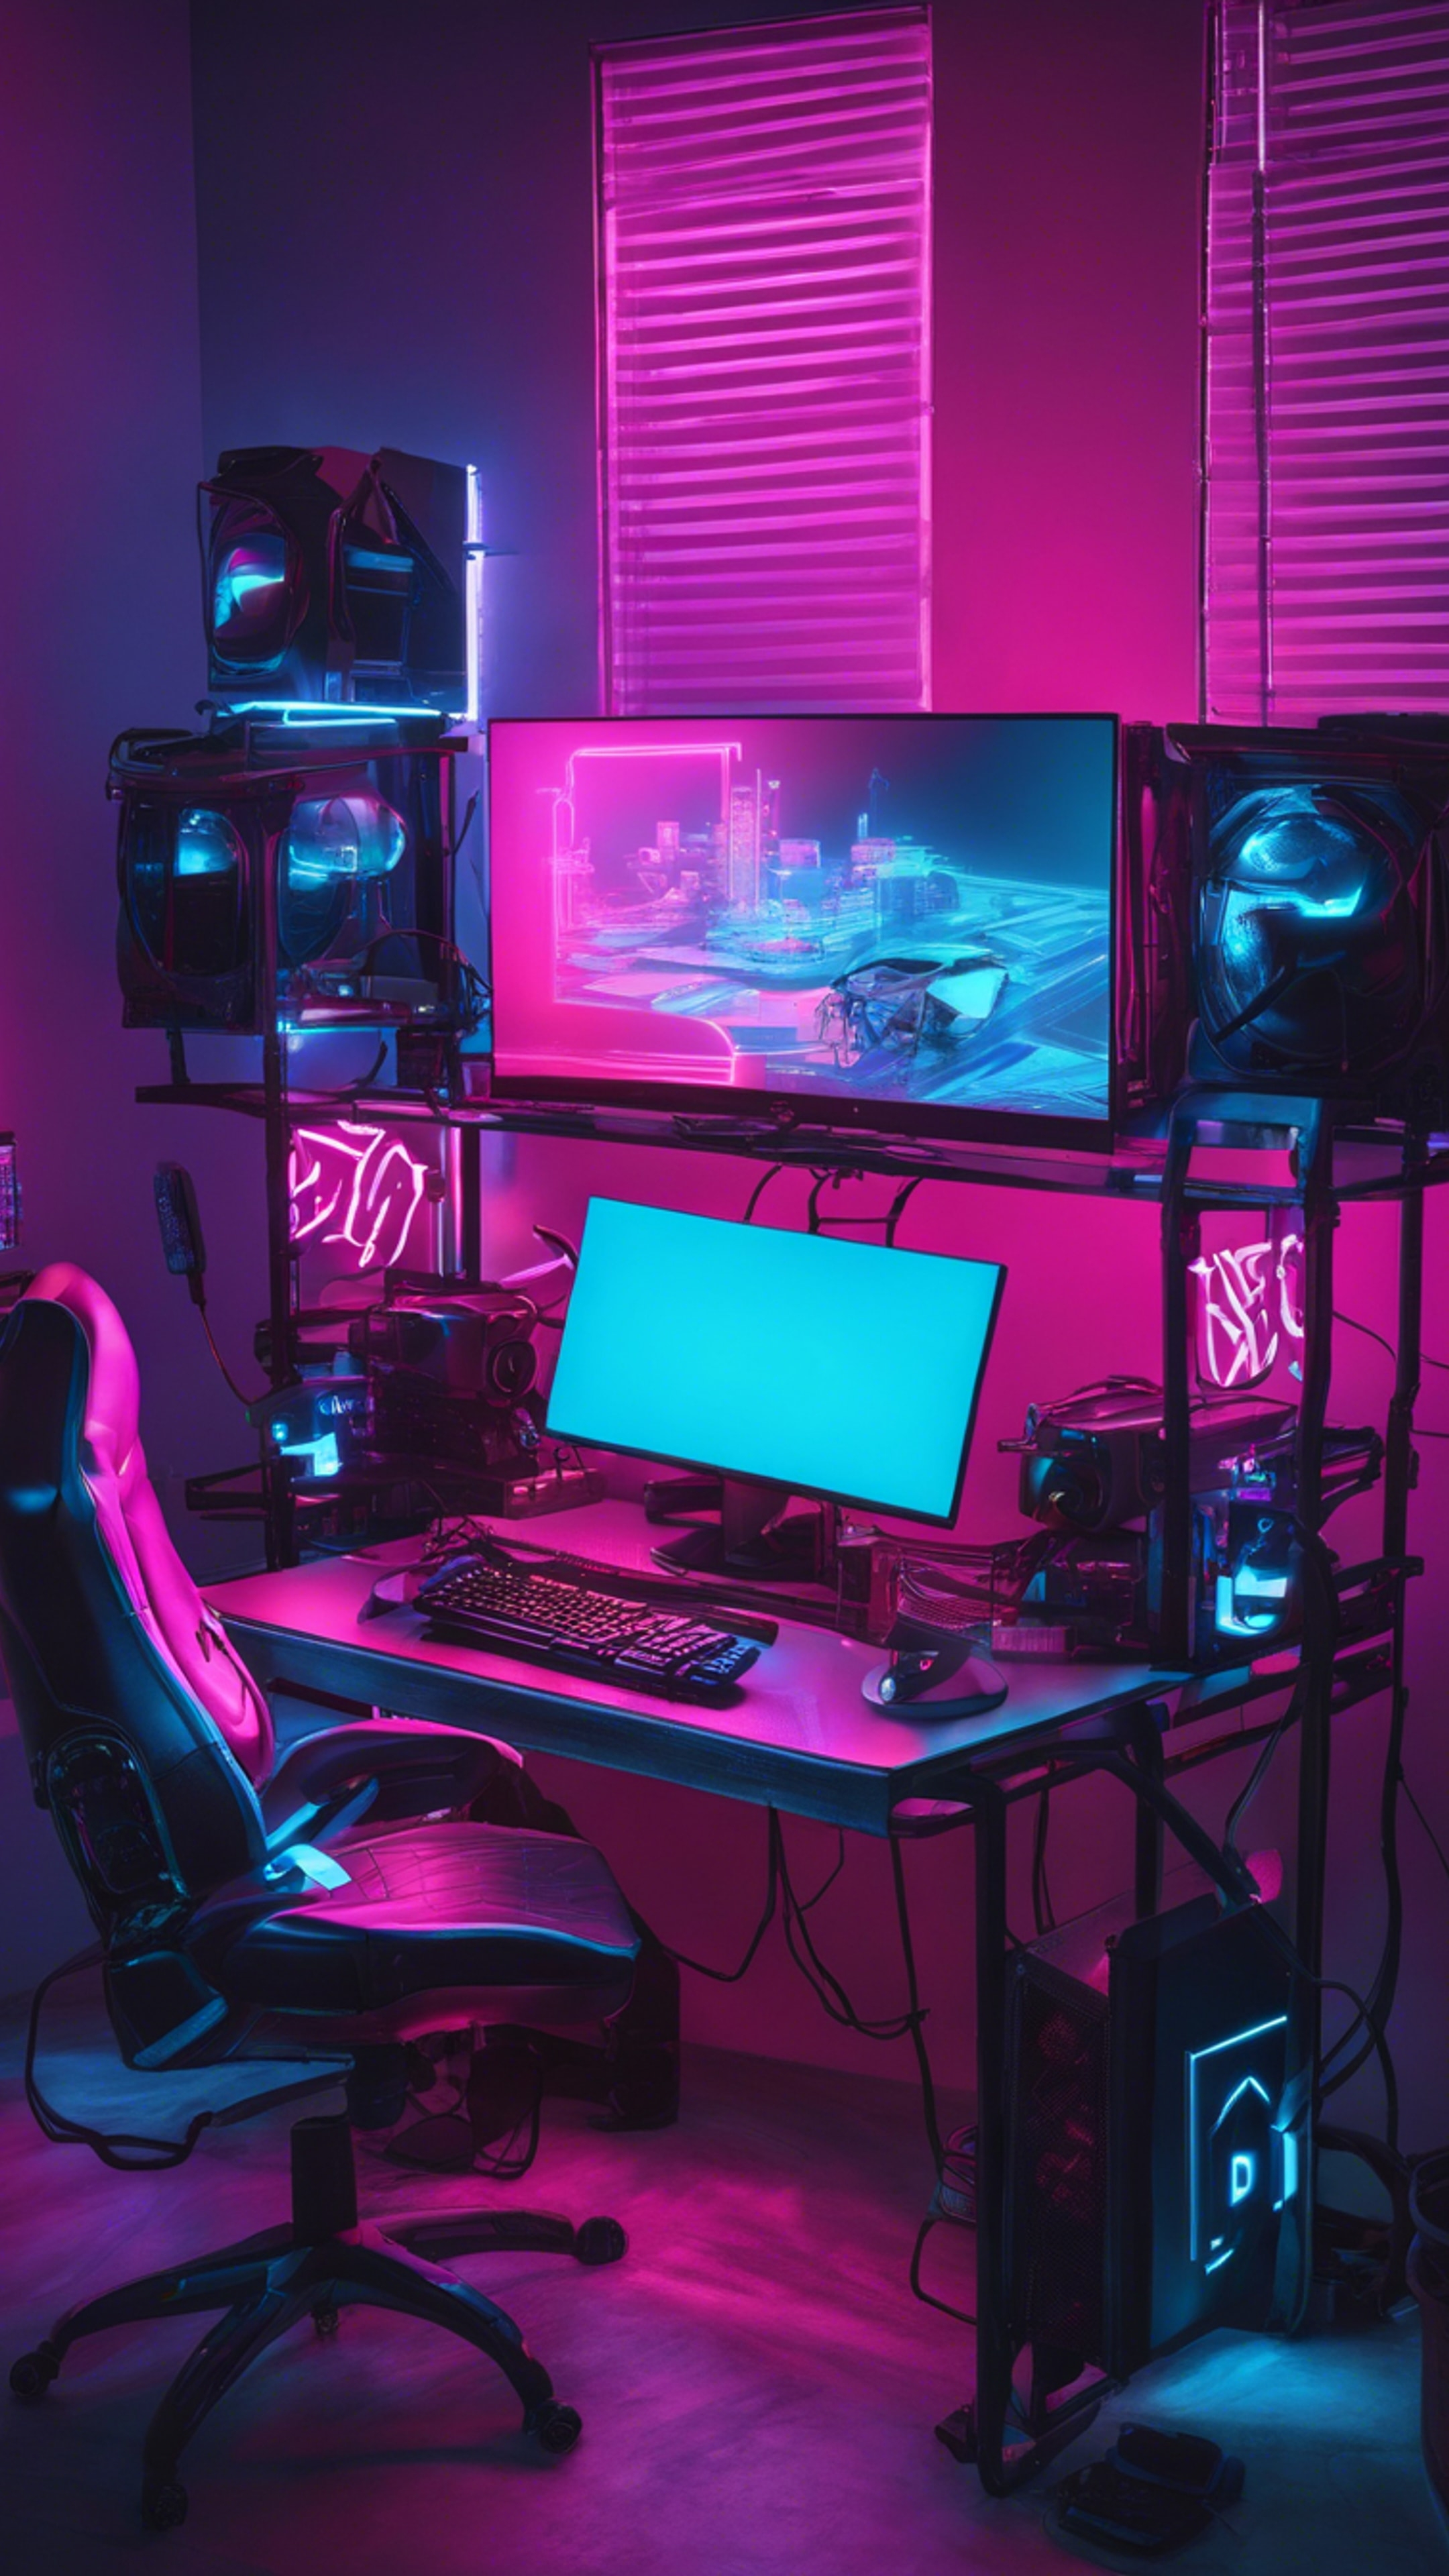 A neon blue gaming setup with a high-end PC, LED keyboard and a gaming monitor. 墙纸[173ea11d79a5456c932c]